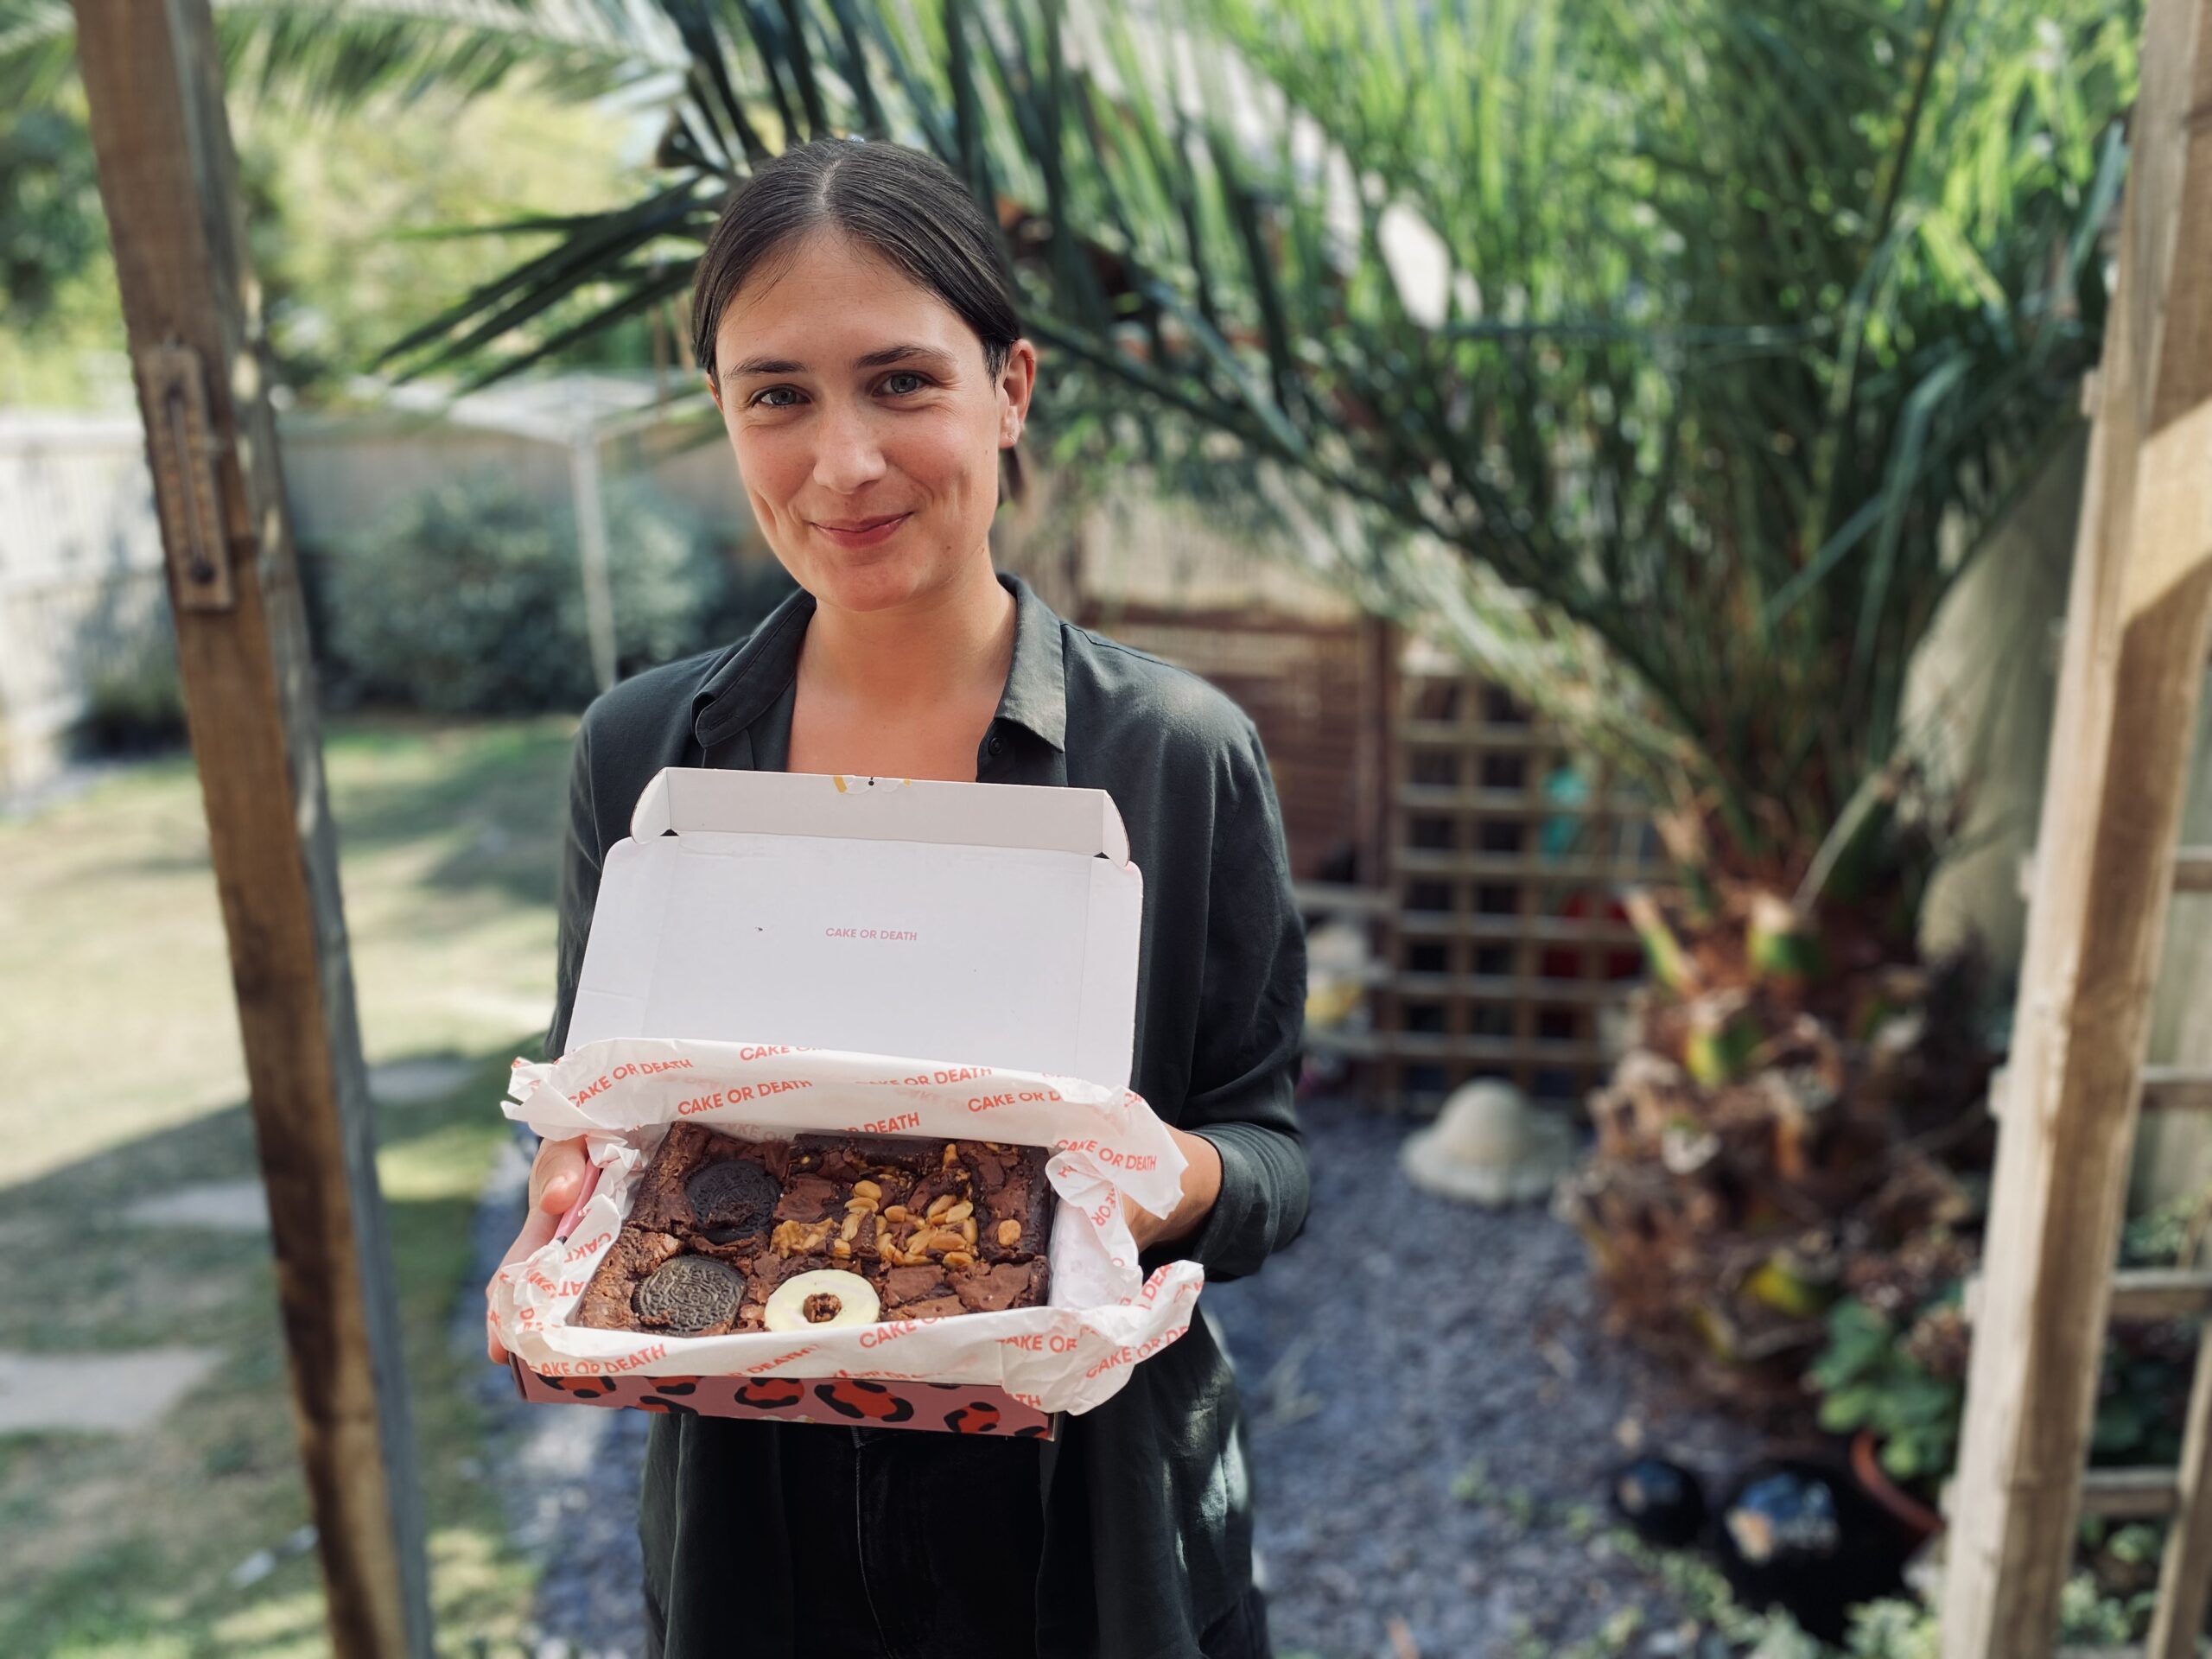 Lucy with a box of cake or death vegan letterbox brownies